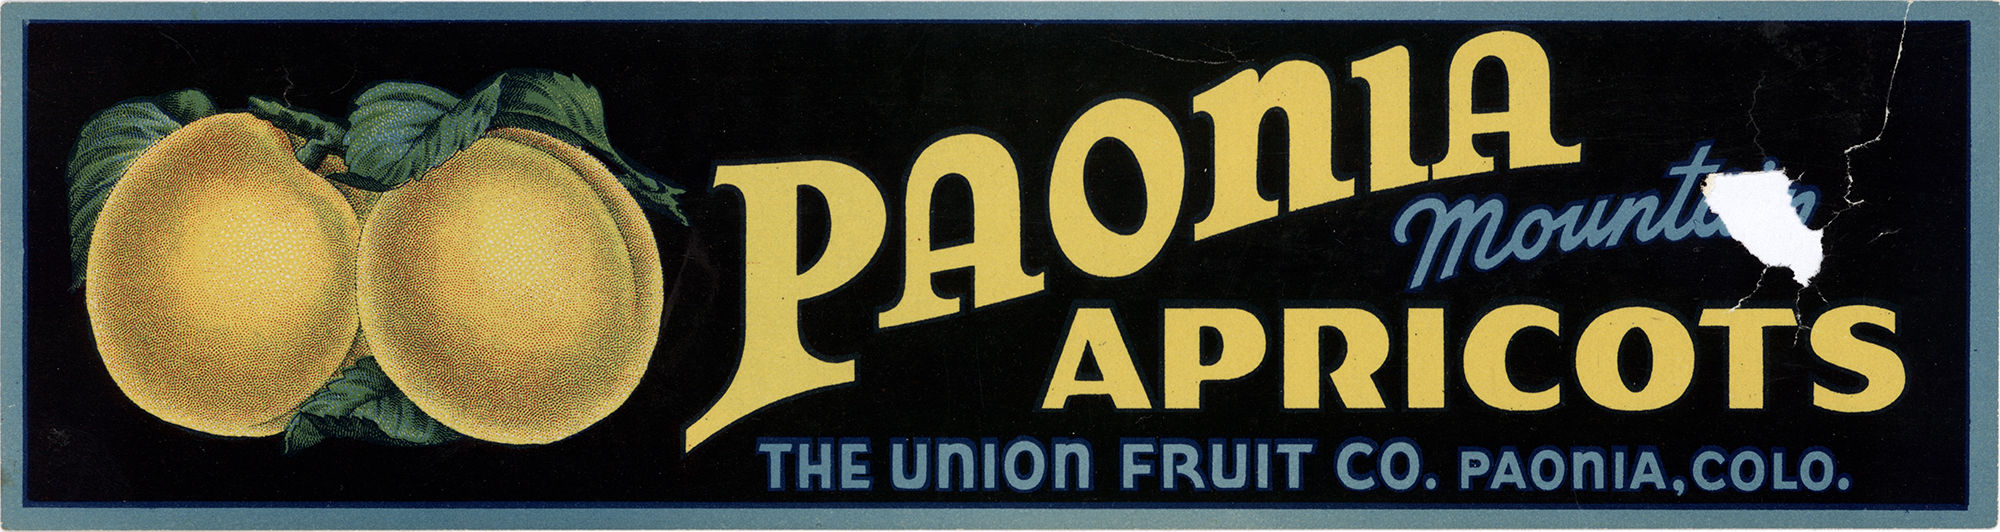 PAONIA MOUNTAIN APRICOTS, THE UNION FRUIT CO., PAONIA, CO.